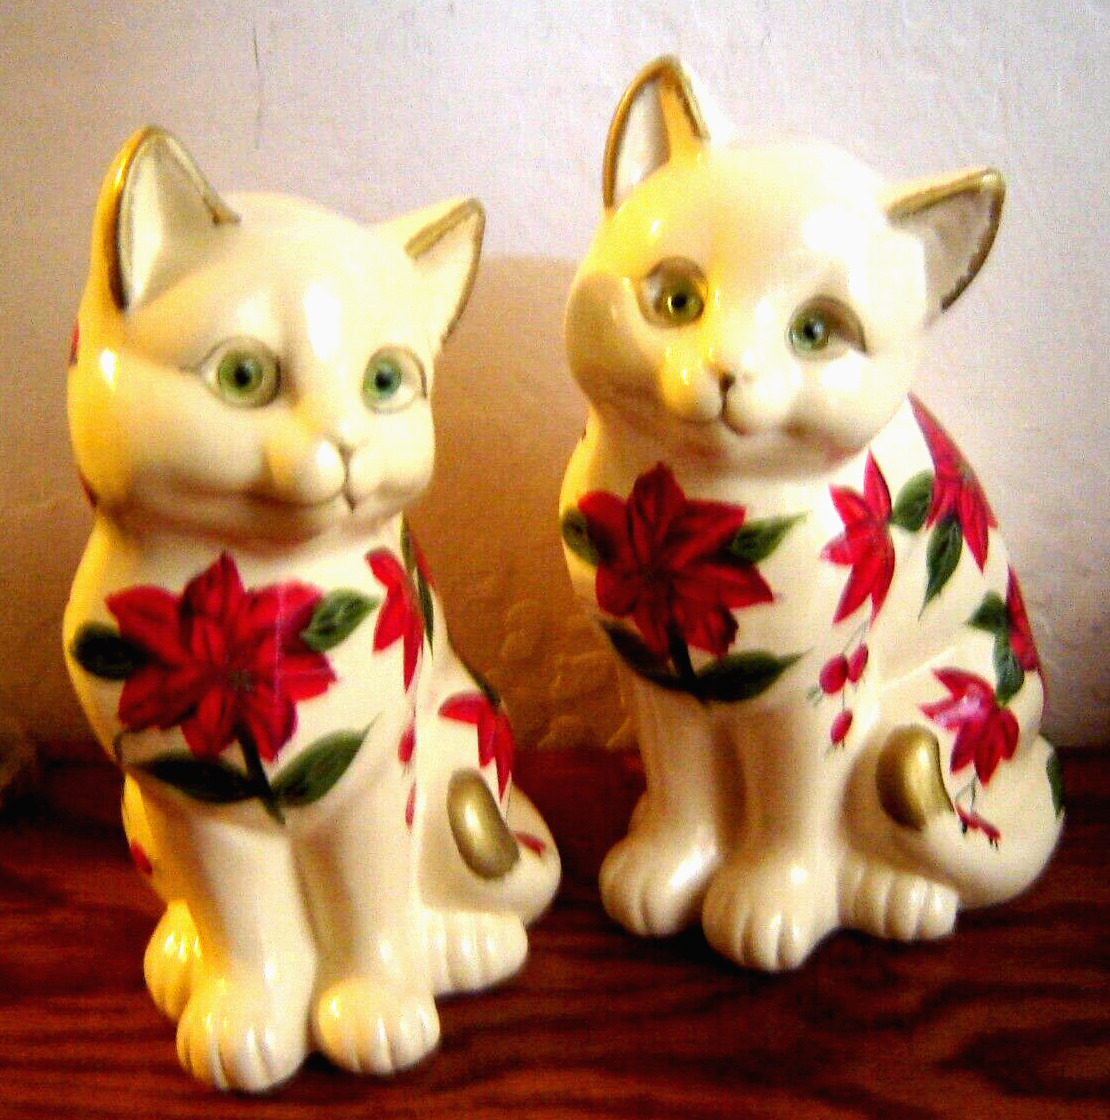 Baum Bros Formalities Cat Figurines Poinsettia Christmas Collection Vintage Pair